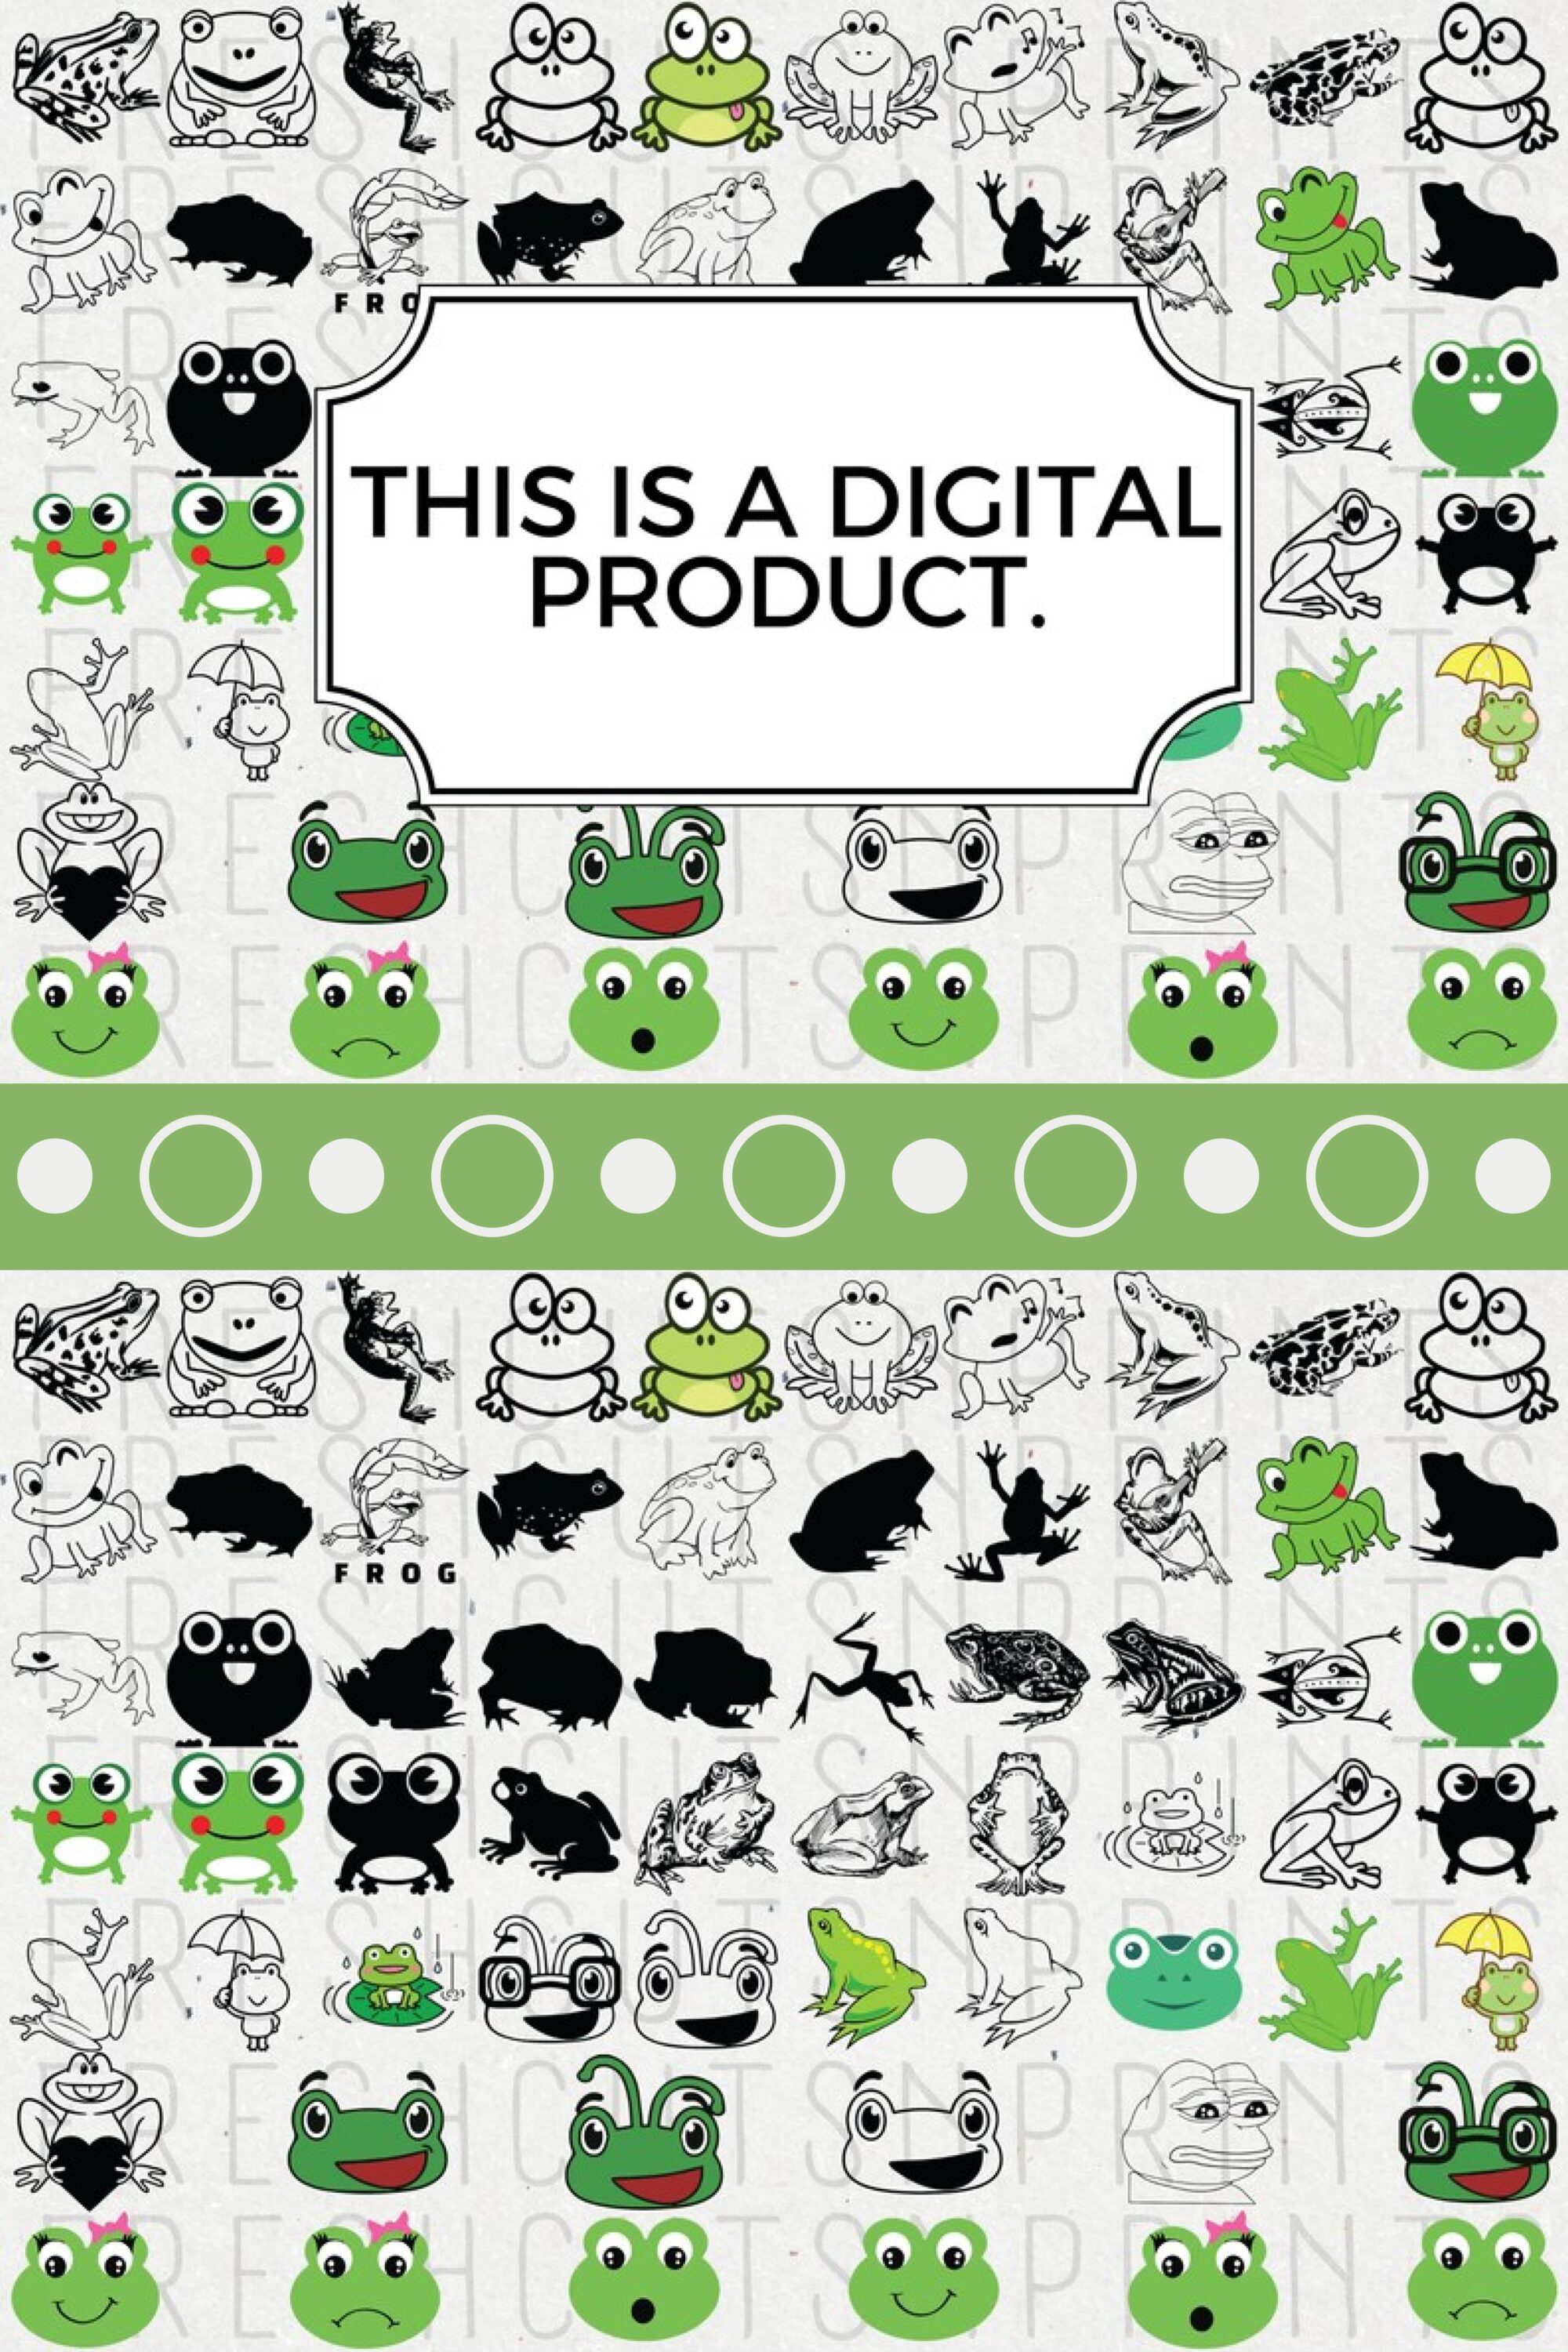 Green and white poster with a bunch of frogs on it.